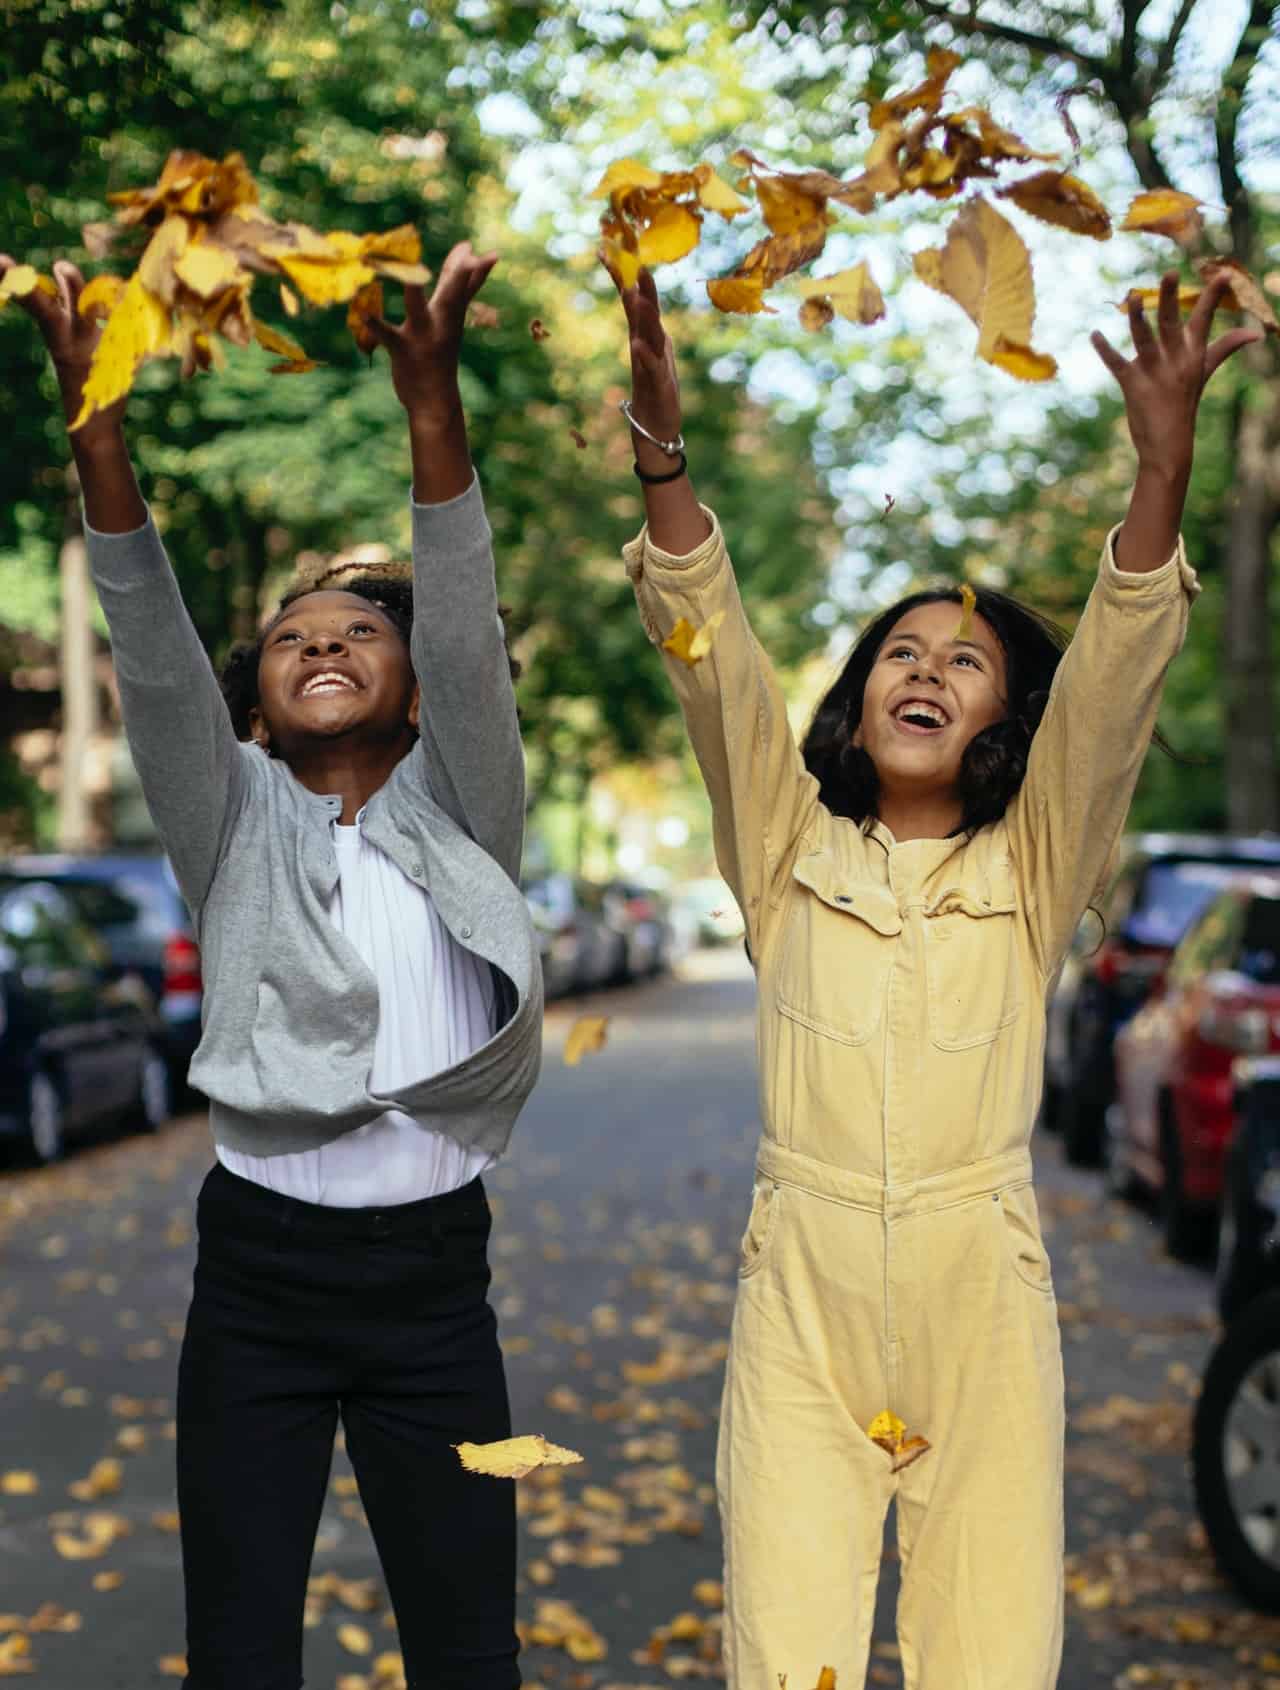 A young black girl and young Hispanic girl throwing leaves in the area in the street